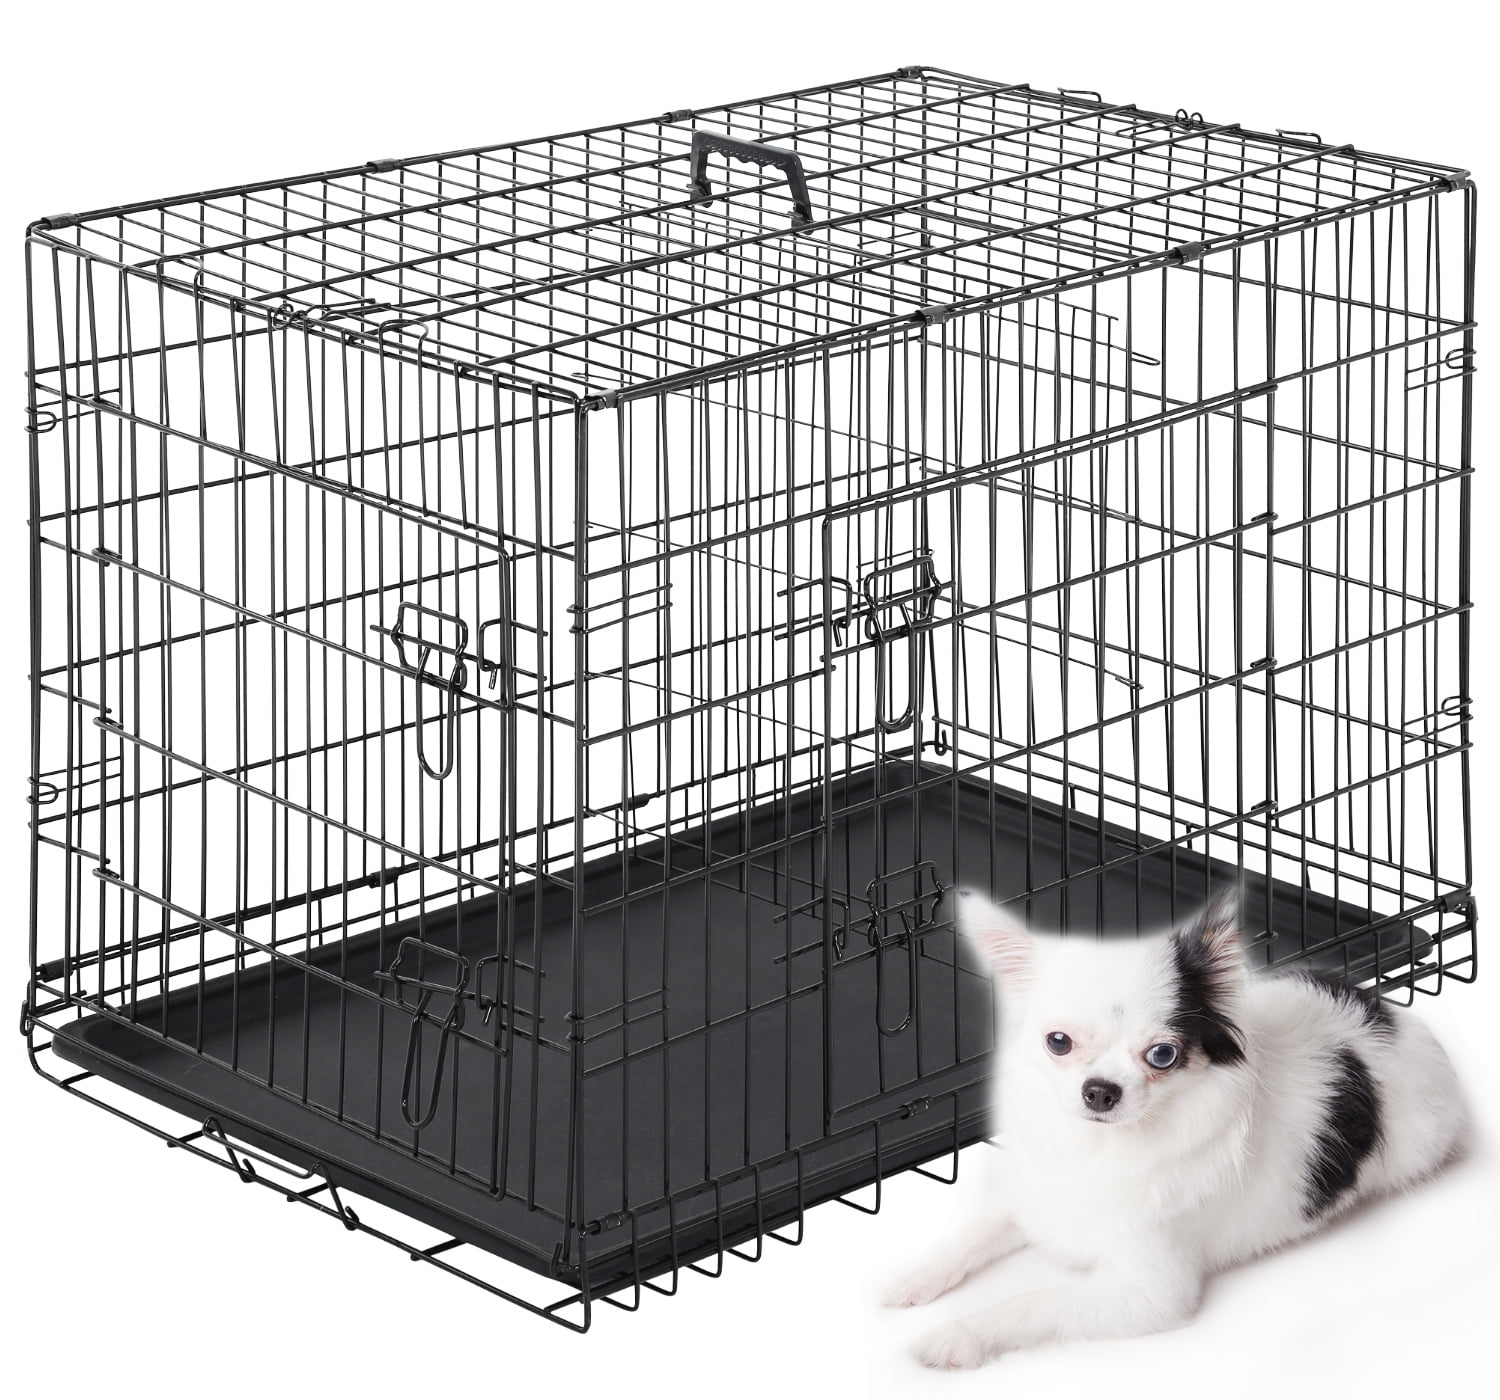 Dog Crate Dog Cage Dog Kennel Pet Crate with Plastic Tray and Handle Metal Wire Double Door Folding Fully Equipped Outdoor Indoor Animal cage for Large Dog Medium Dog 36 inches 